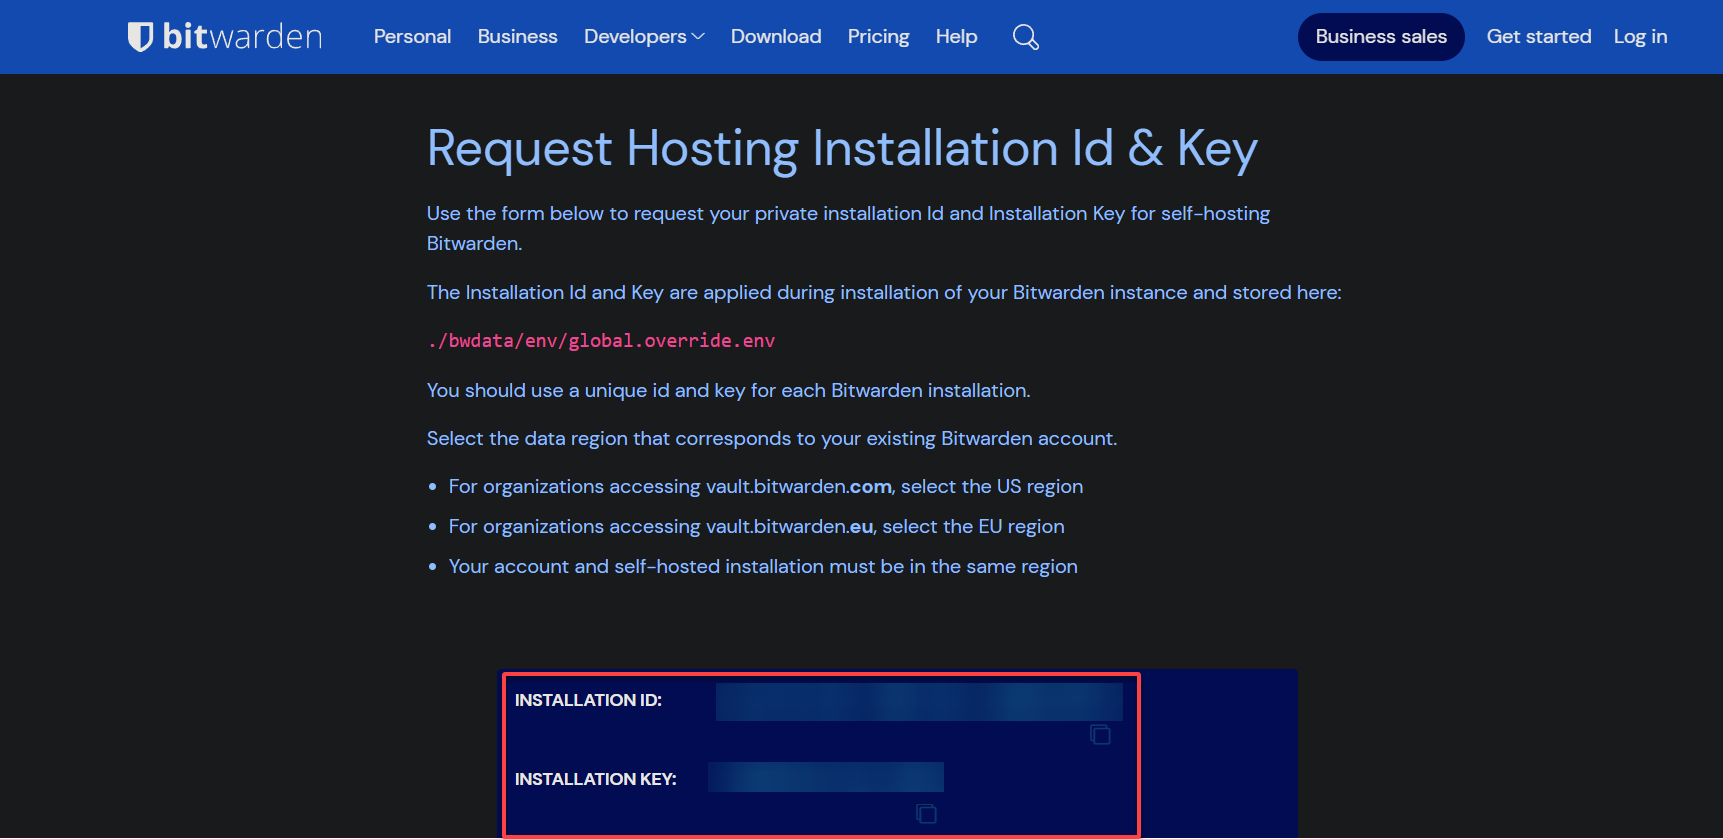 Copying the installation ID and key